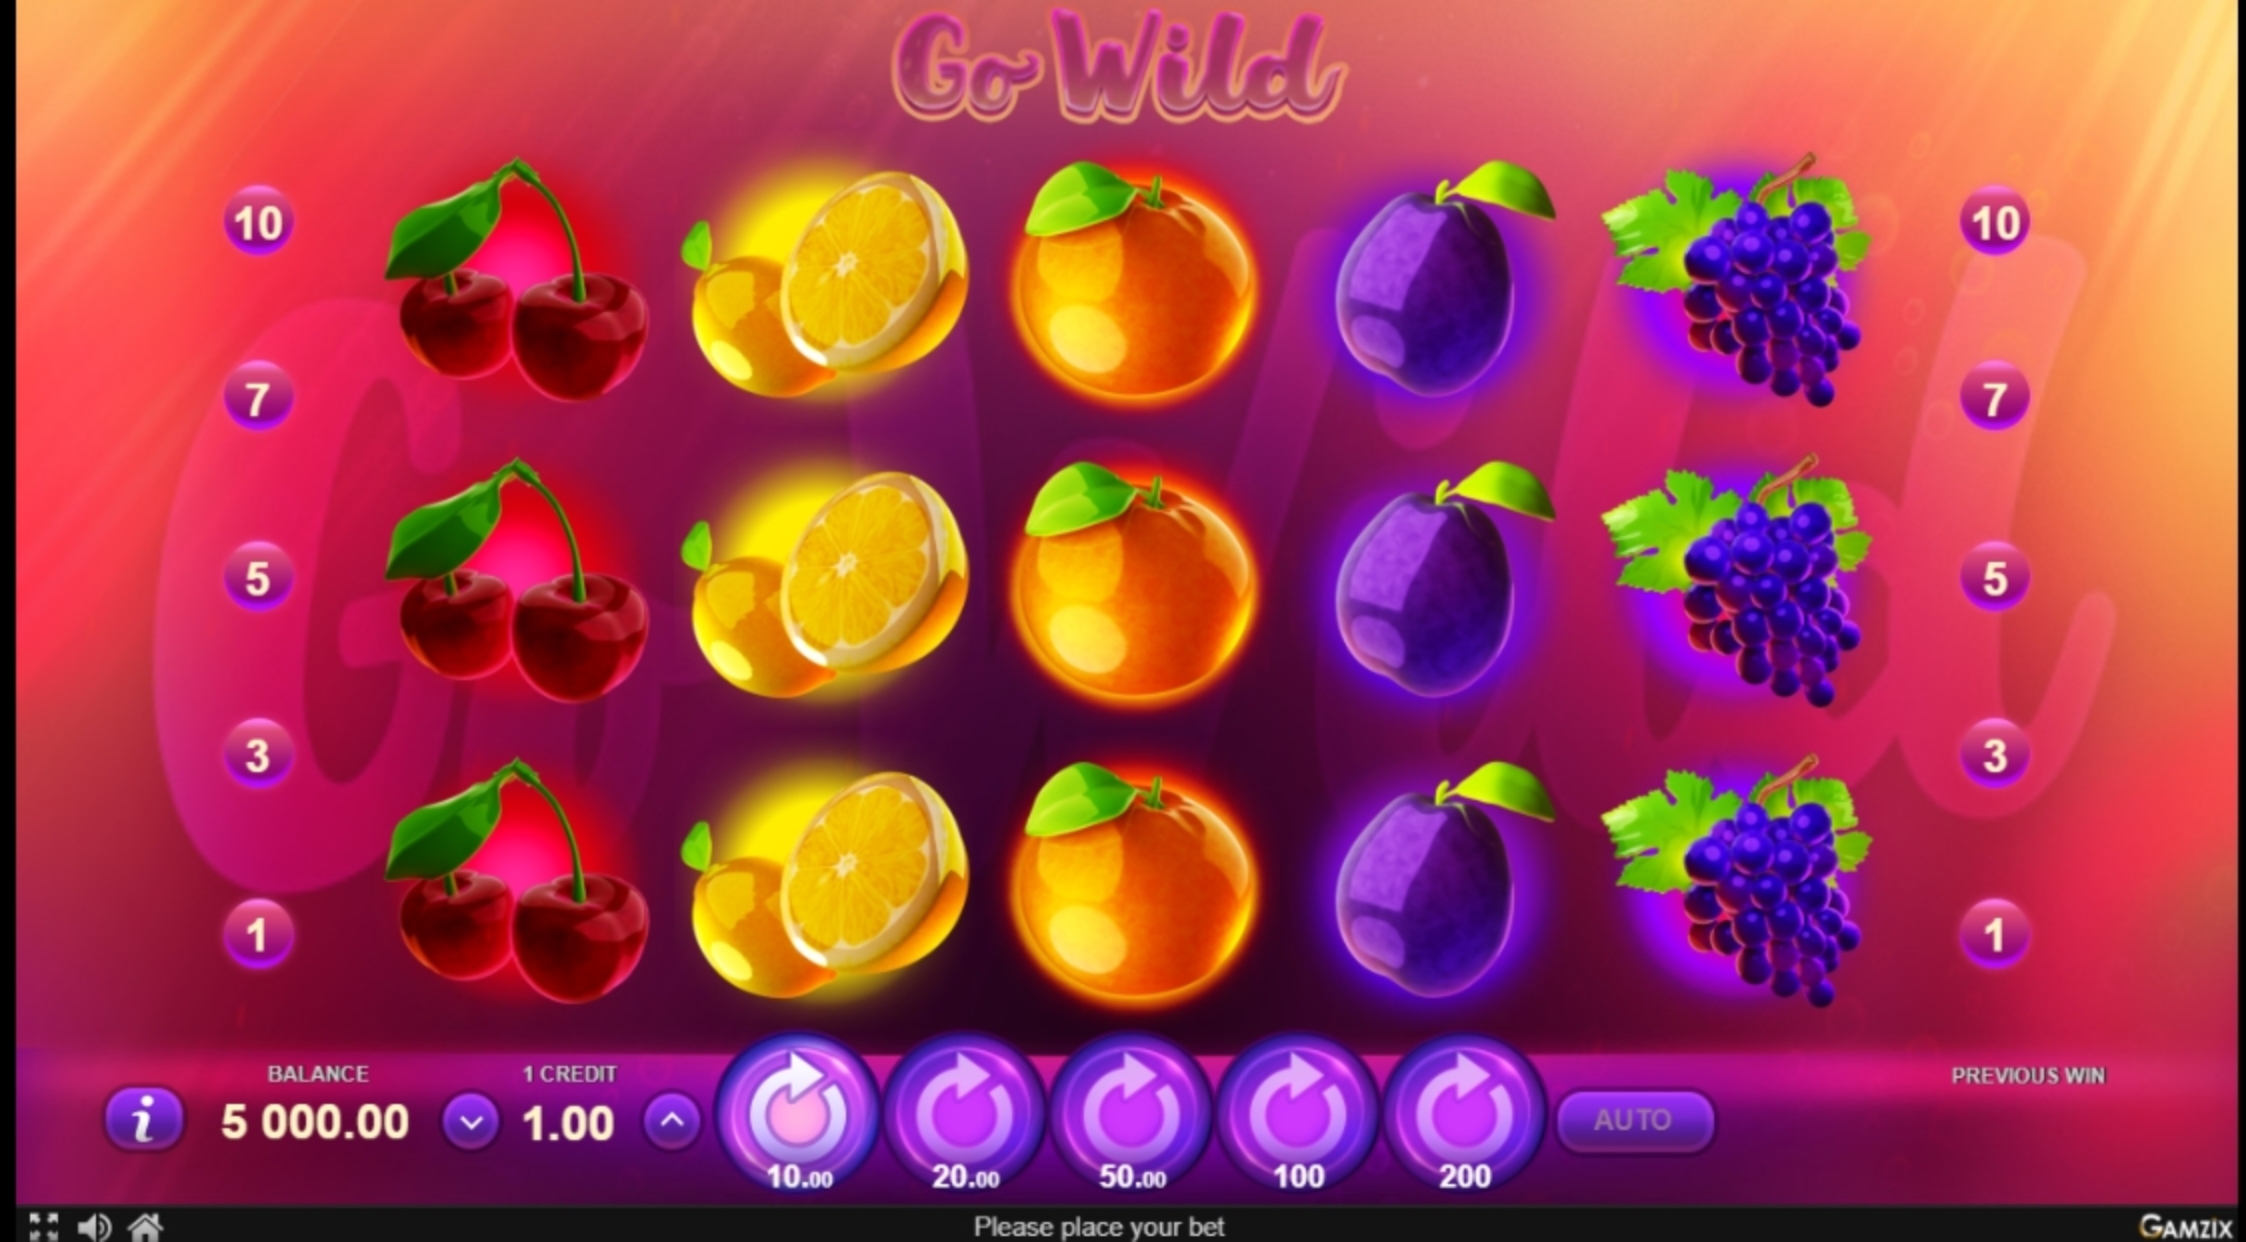 Reels in Go Wild Slot Game by Gamzix